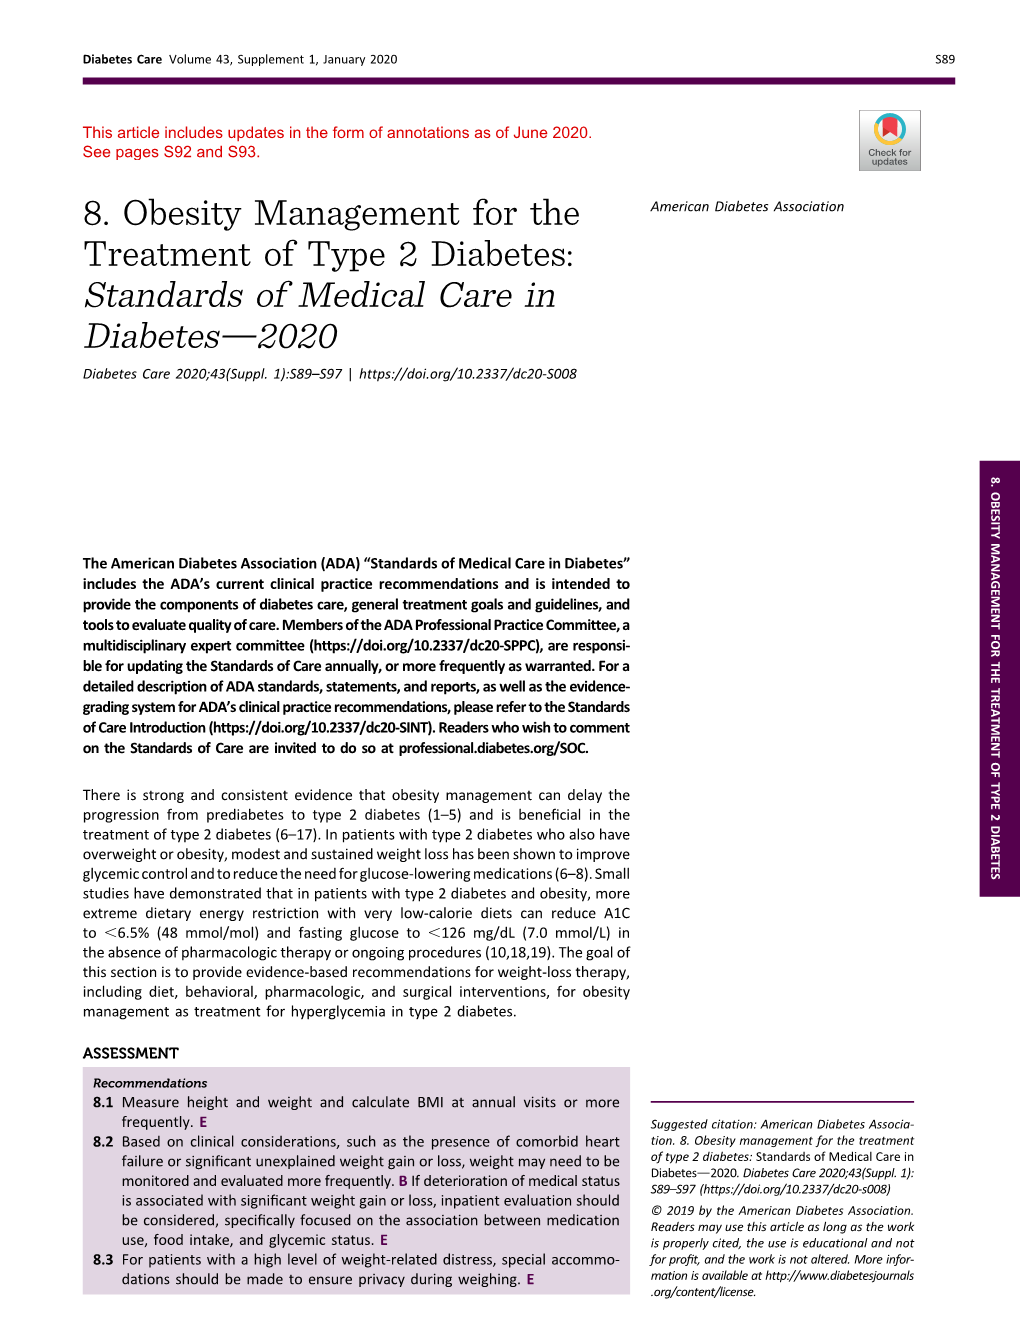 8. Obesity Management for the Treatment of Type 2 Diabetes: Standards of Medical Care in Diabetes—2020